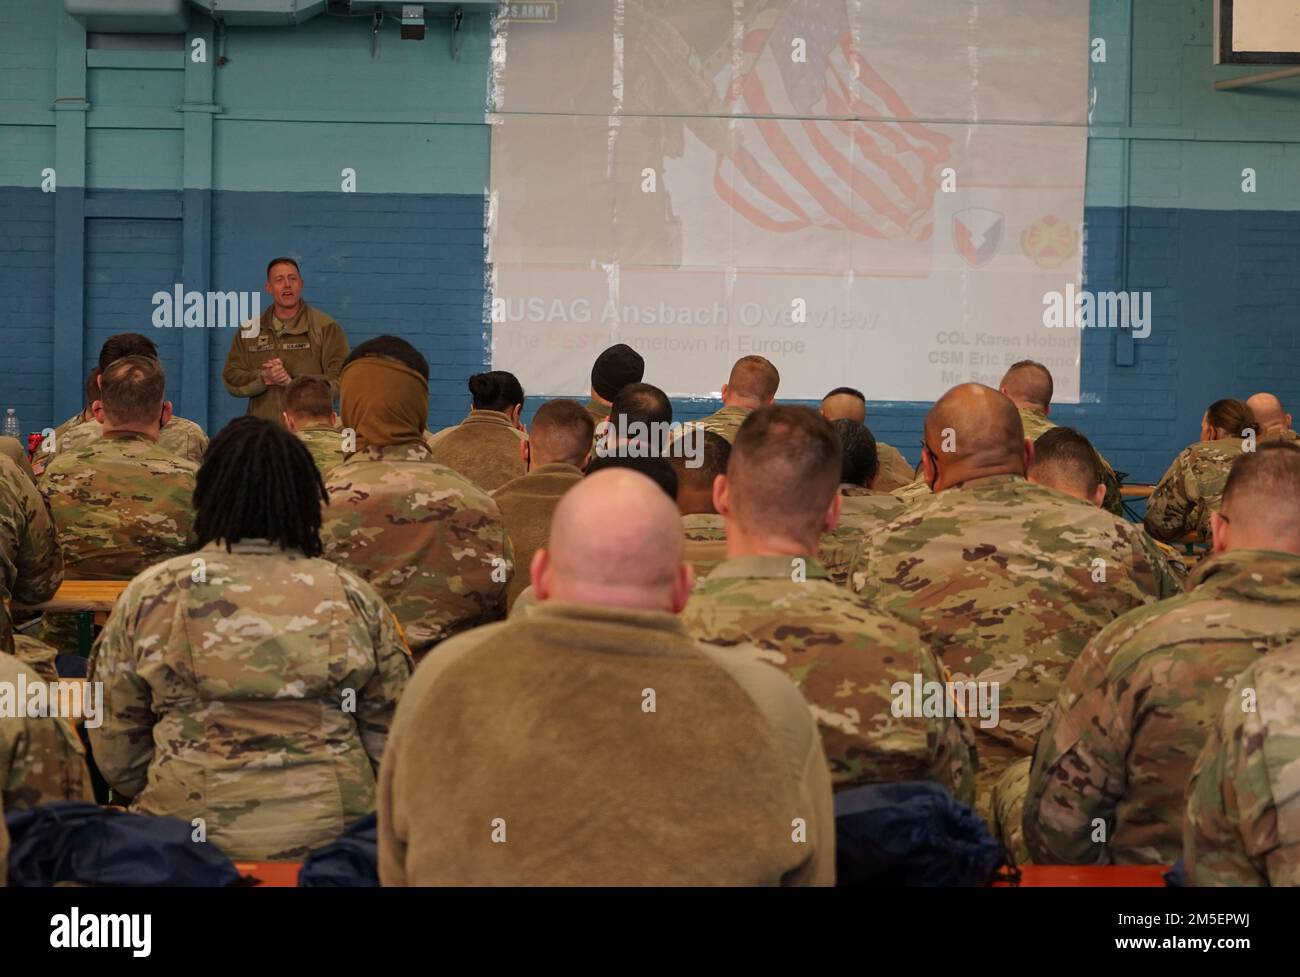 Col. Thomas Galli, V Corps, Fort Knox, Ky., talks with Soldiers during inprocessing on Barton Barracks, Ansbach, Germany, March 8, 2022, as part of a deployment to Germany to build readiness, improve interoperability, reinforce allies and deter further Russian aggression. The deployment of U.S. forces here is a prudent measure that underpins NATO’s collective war-prevention aims, defensive orientation and commitment to protect all Allies. Stock Photo